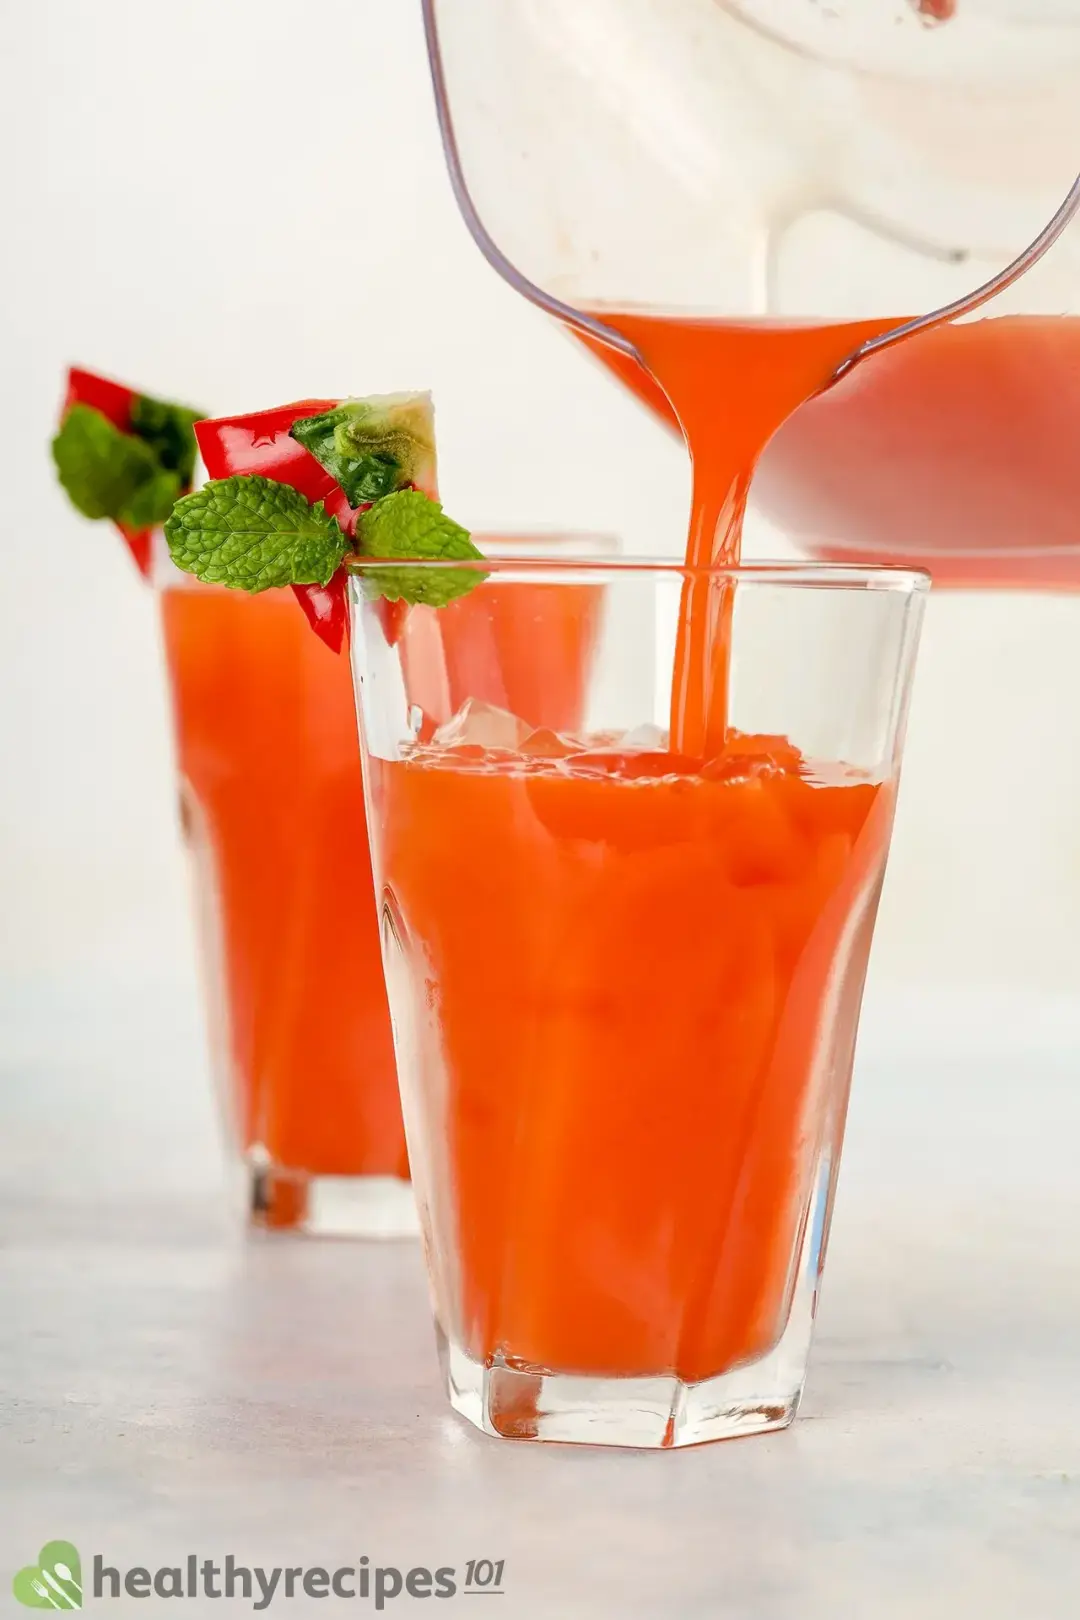 A glass of bell pepper juice garnished with mints, next to another glass being poured pepper juice from a pitcher